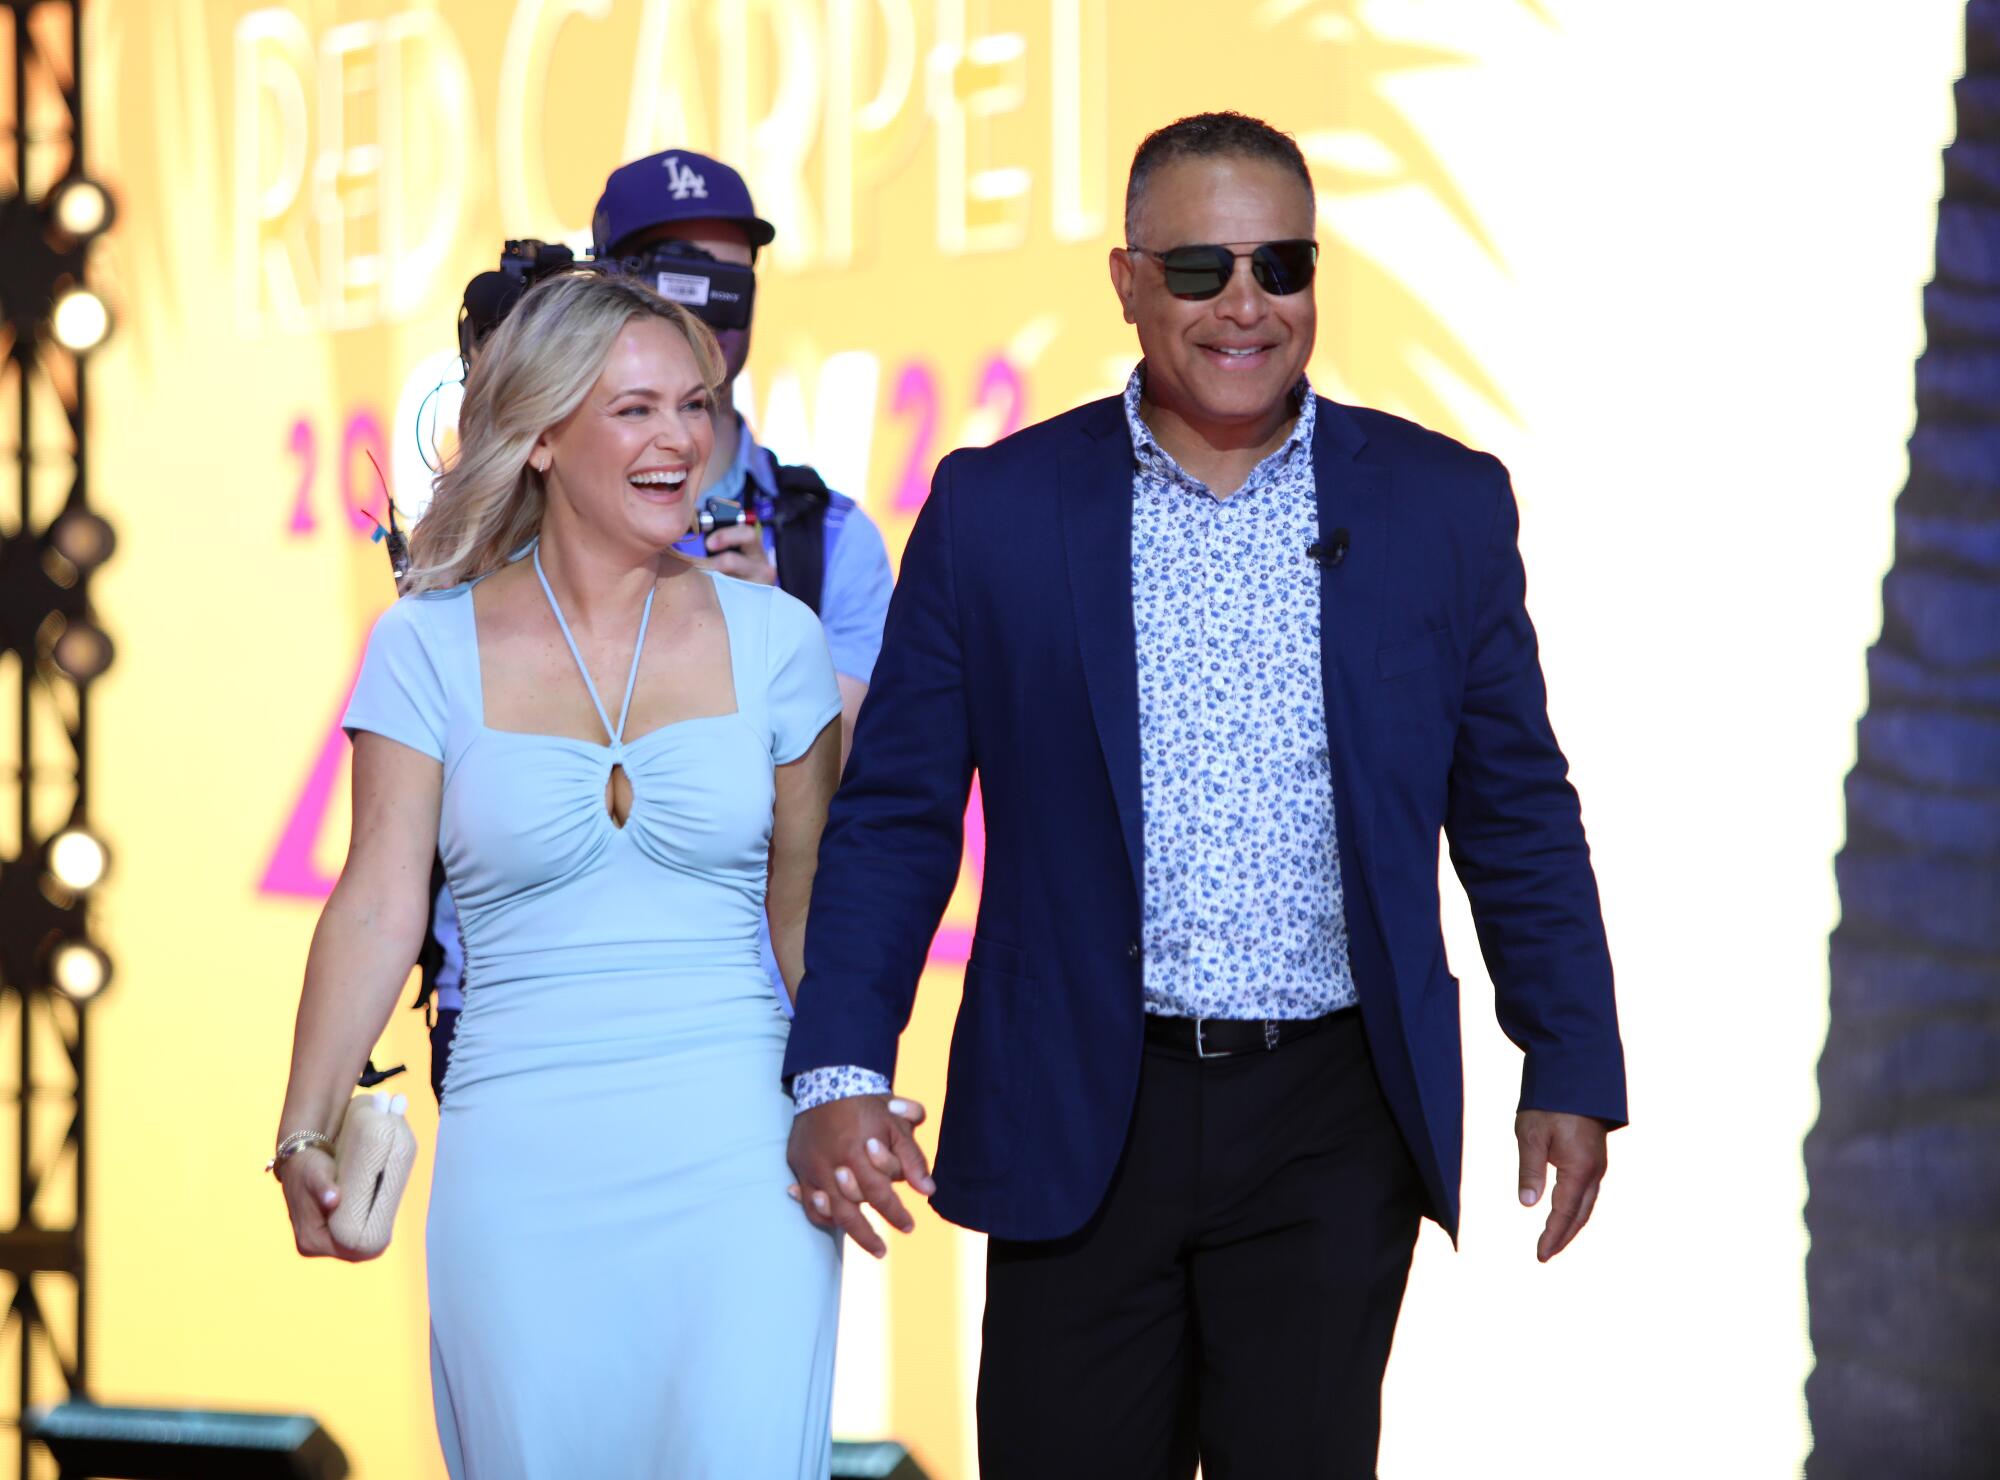 Dodgers manager Dave Roberts in a blue and black suit arrives with his wife at the 2022 MLB All-Star Game Red Carpet Show.